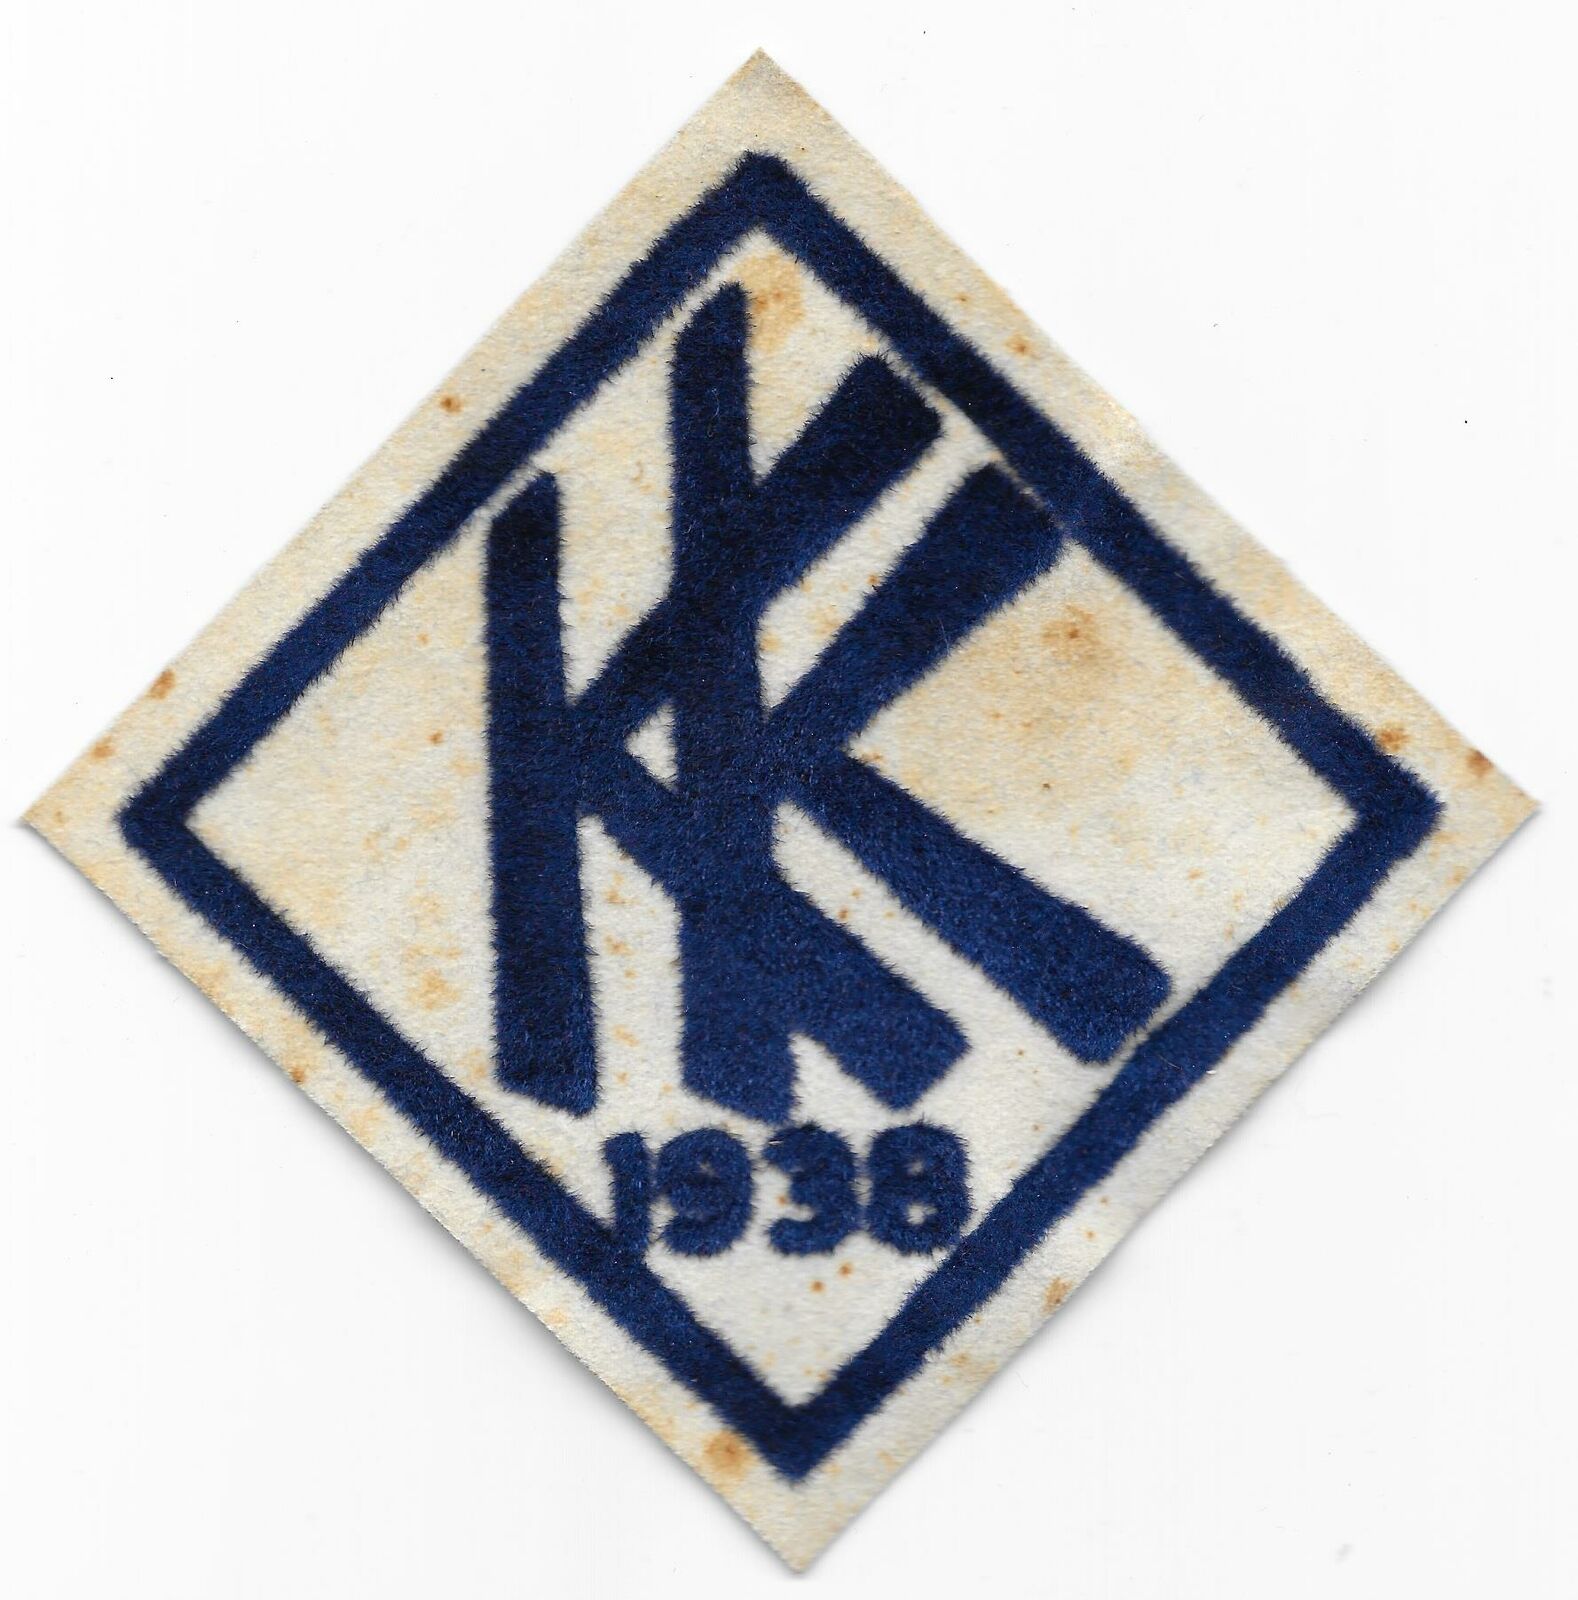 1938 Camp KK Flocked on Composite Patch Unknown Council Boy Scout of America BSA